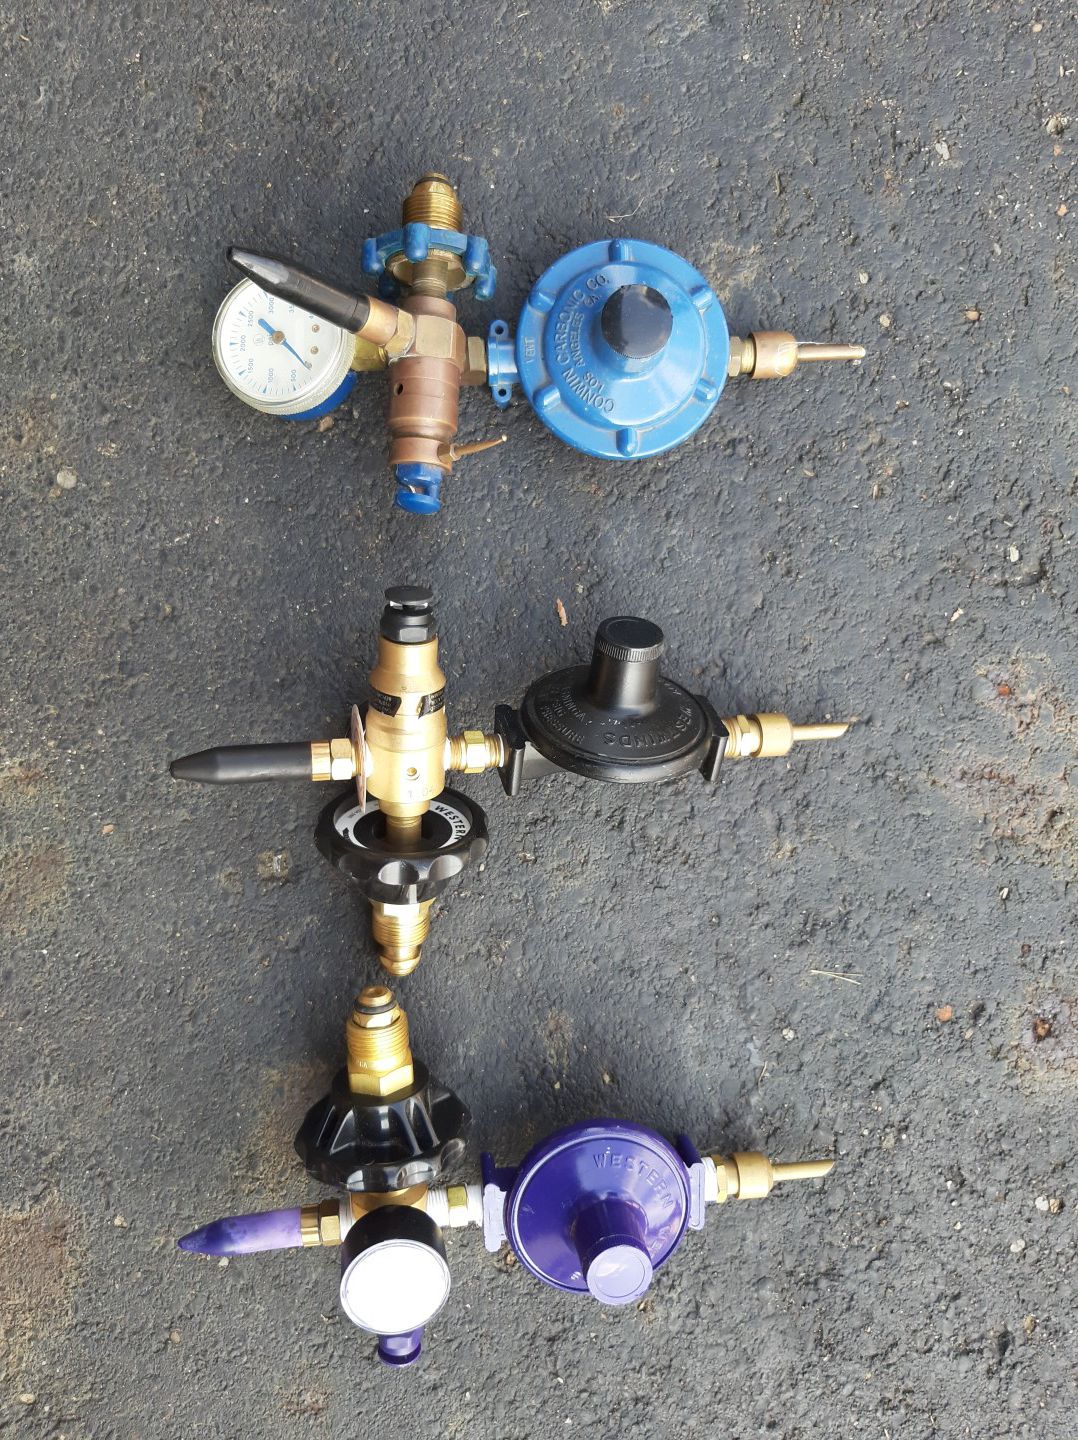 Helium balloon valves gages for my lar and rubber balloons18.00 each